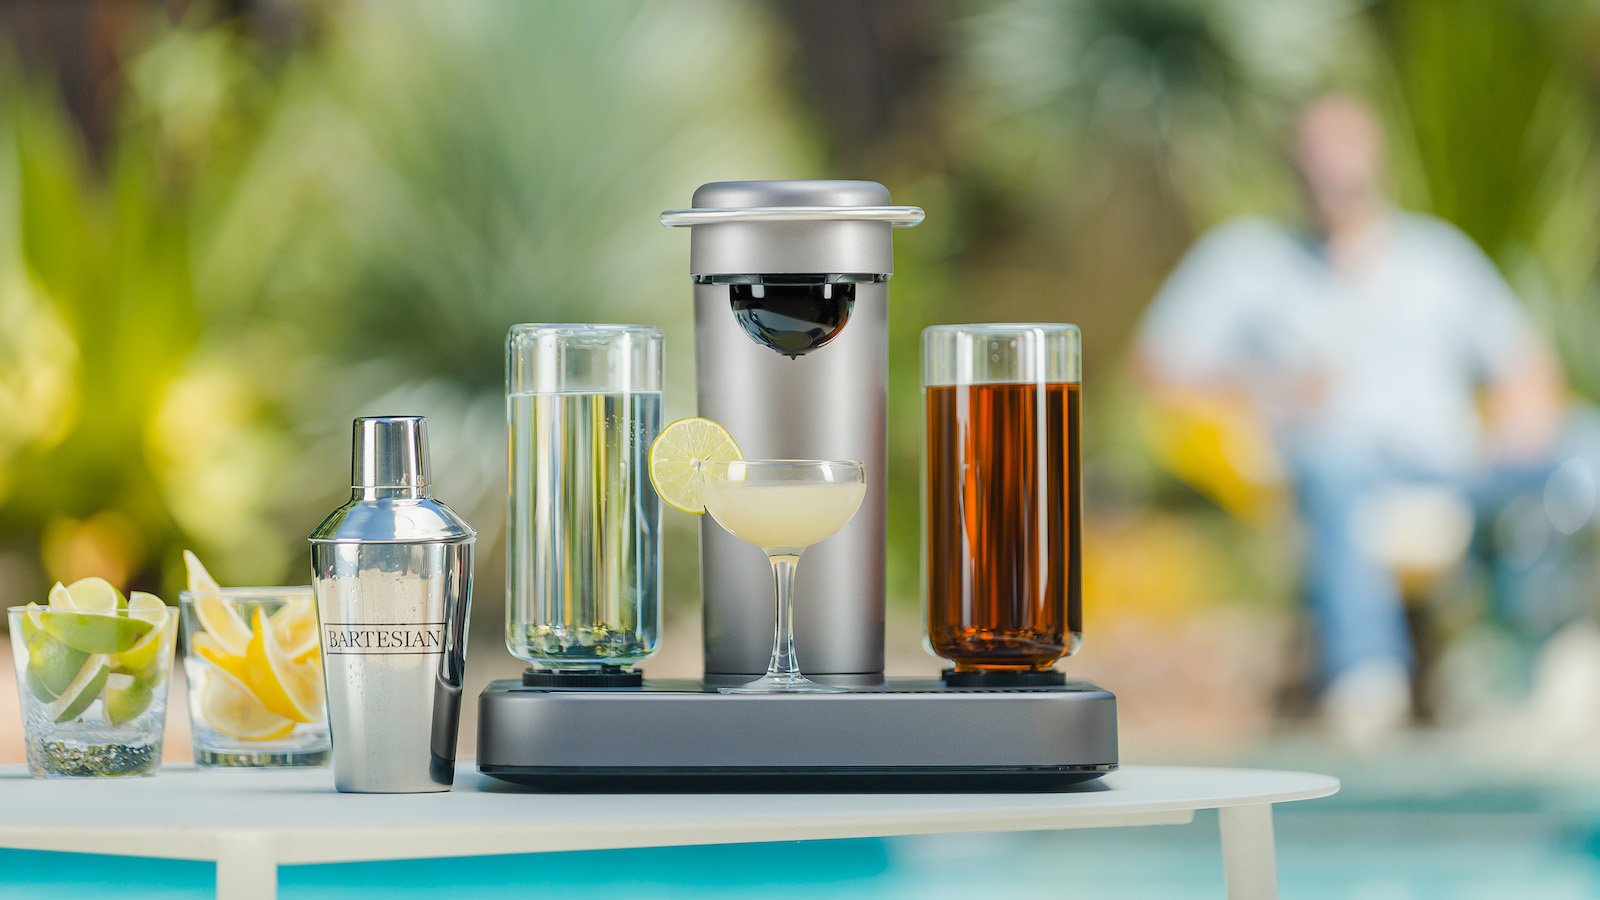 Bartesian home cocktail maker dispenses delicious drinks in seconds